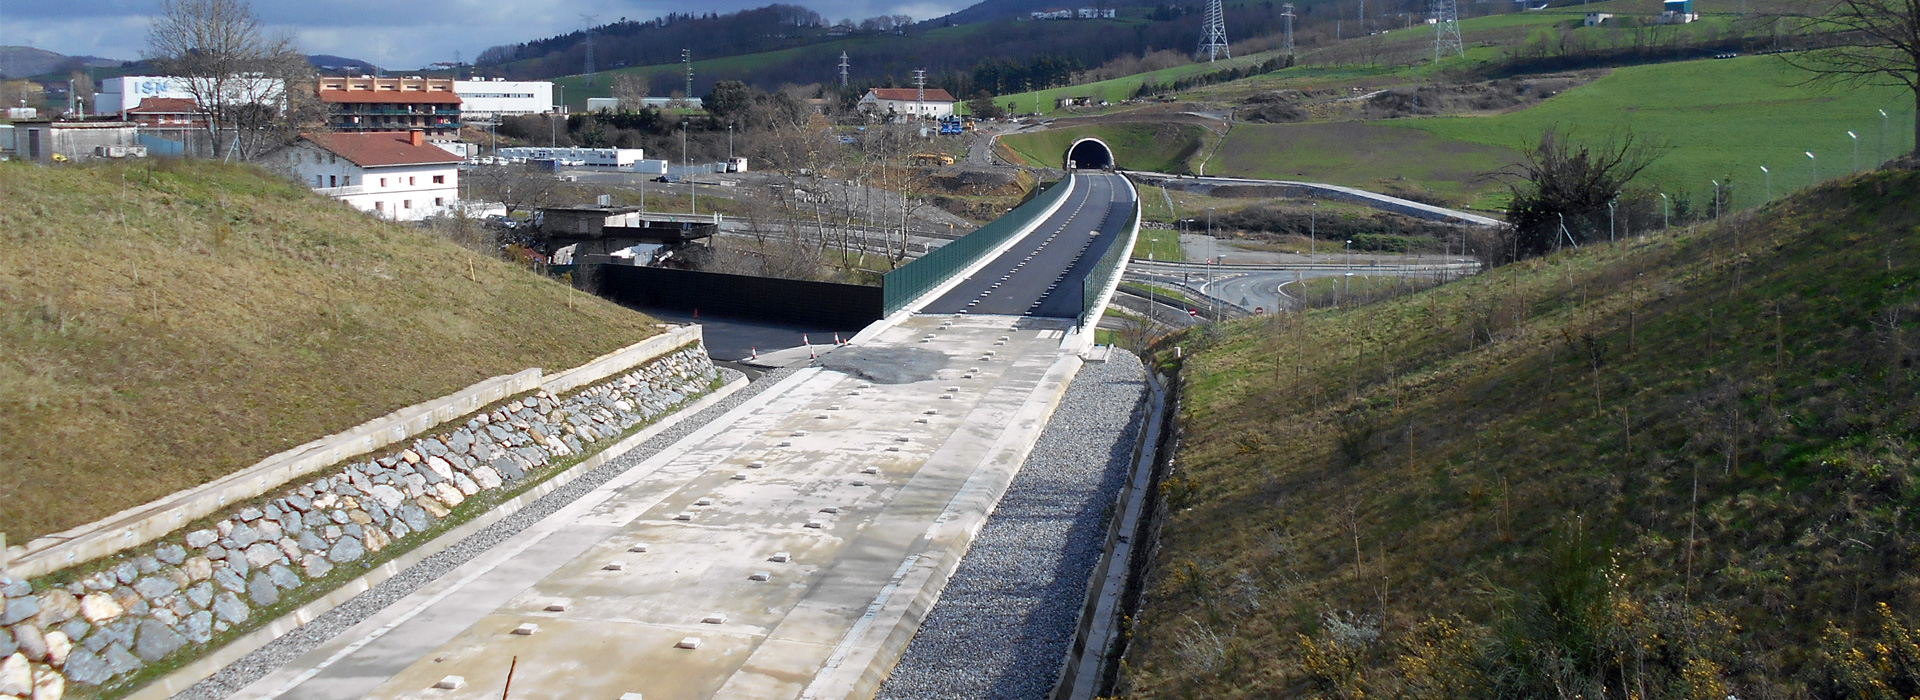 HIGH SPEED RAILWAY OF THE BASQUE COUNTRY. SECTIONS: ANDOAIN-URNIETA-HERNANI - 1